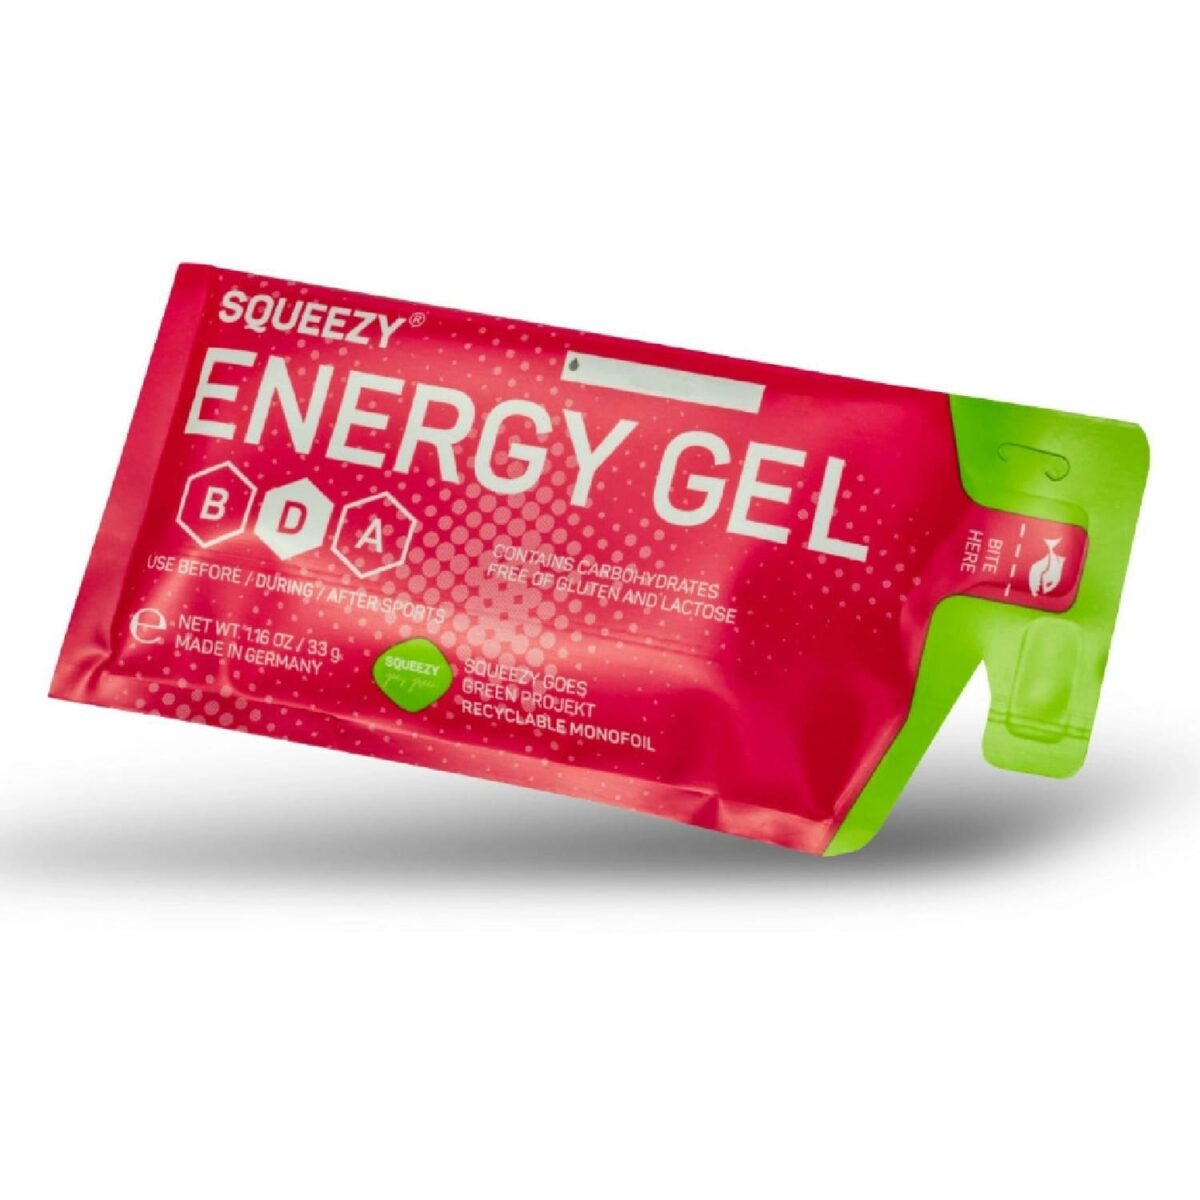 Squeezy-Energy-Gel-Cola-Caf-1